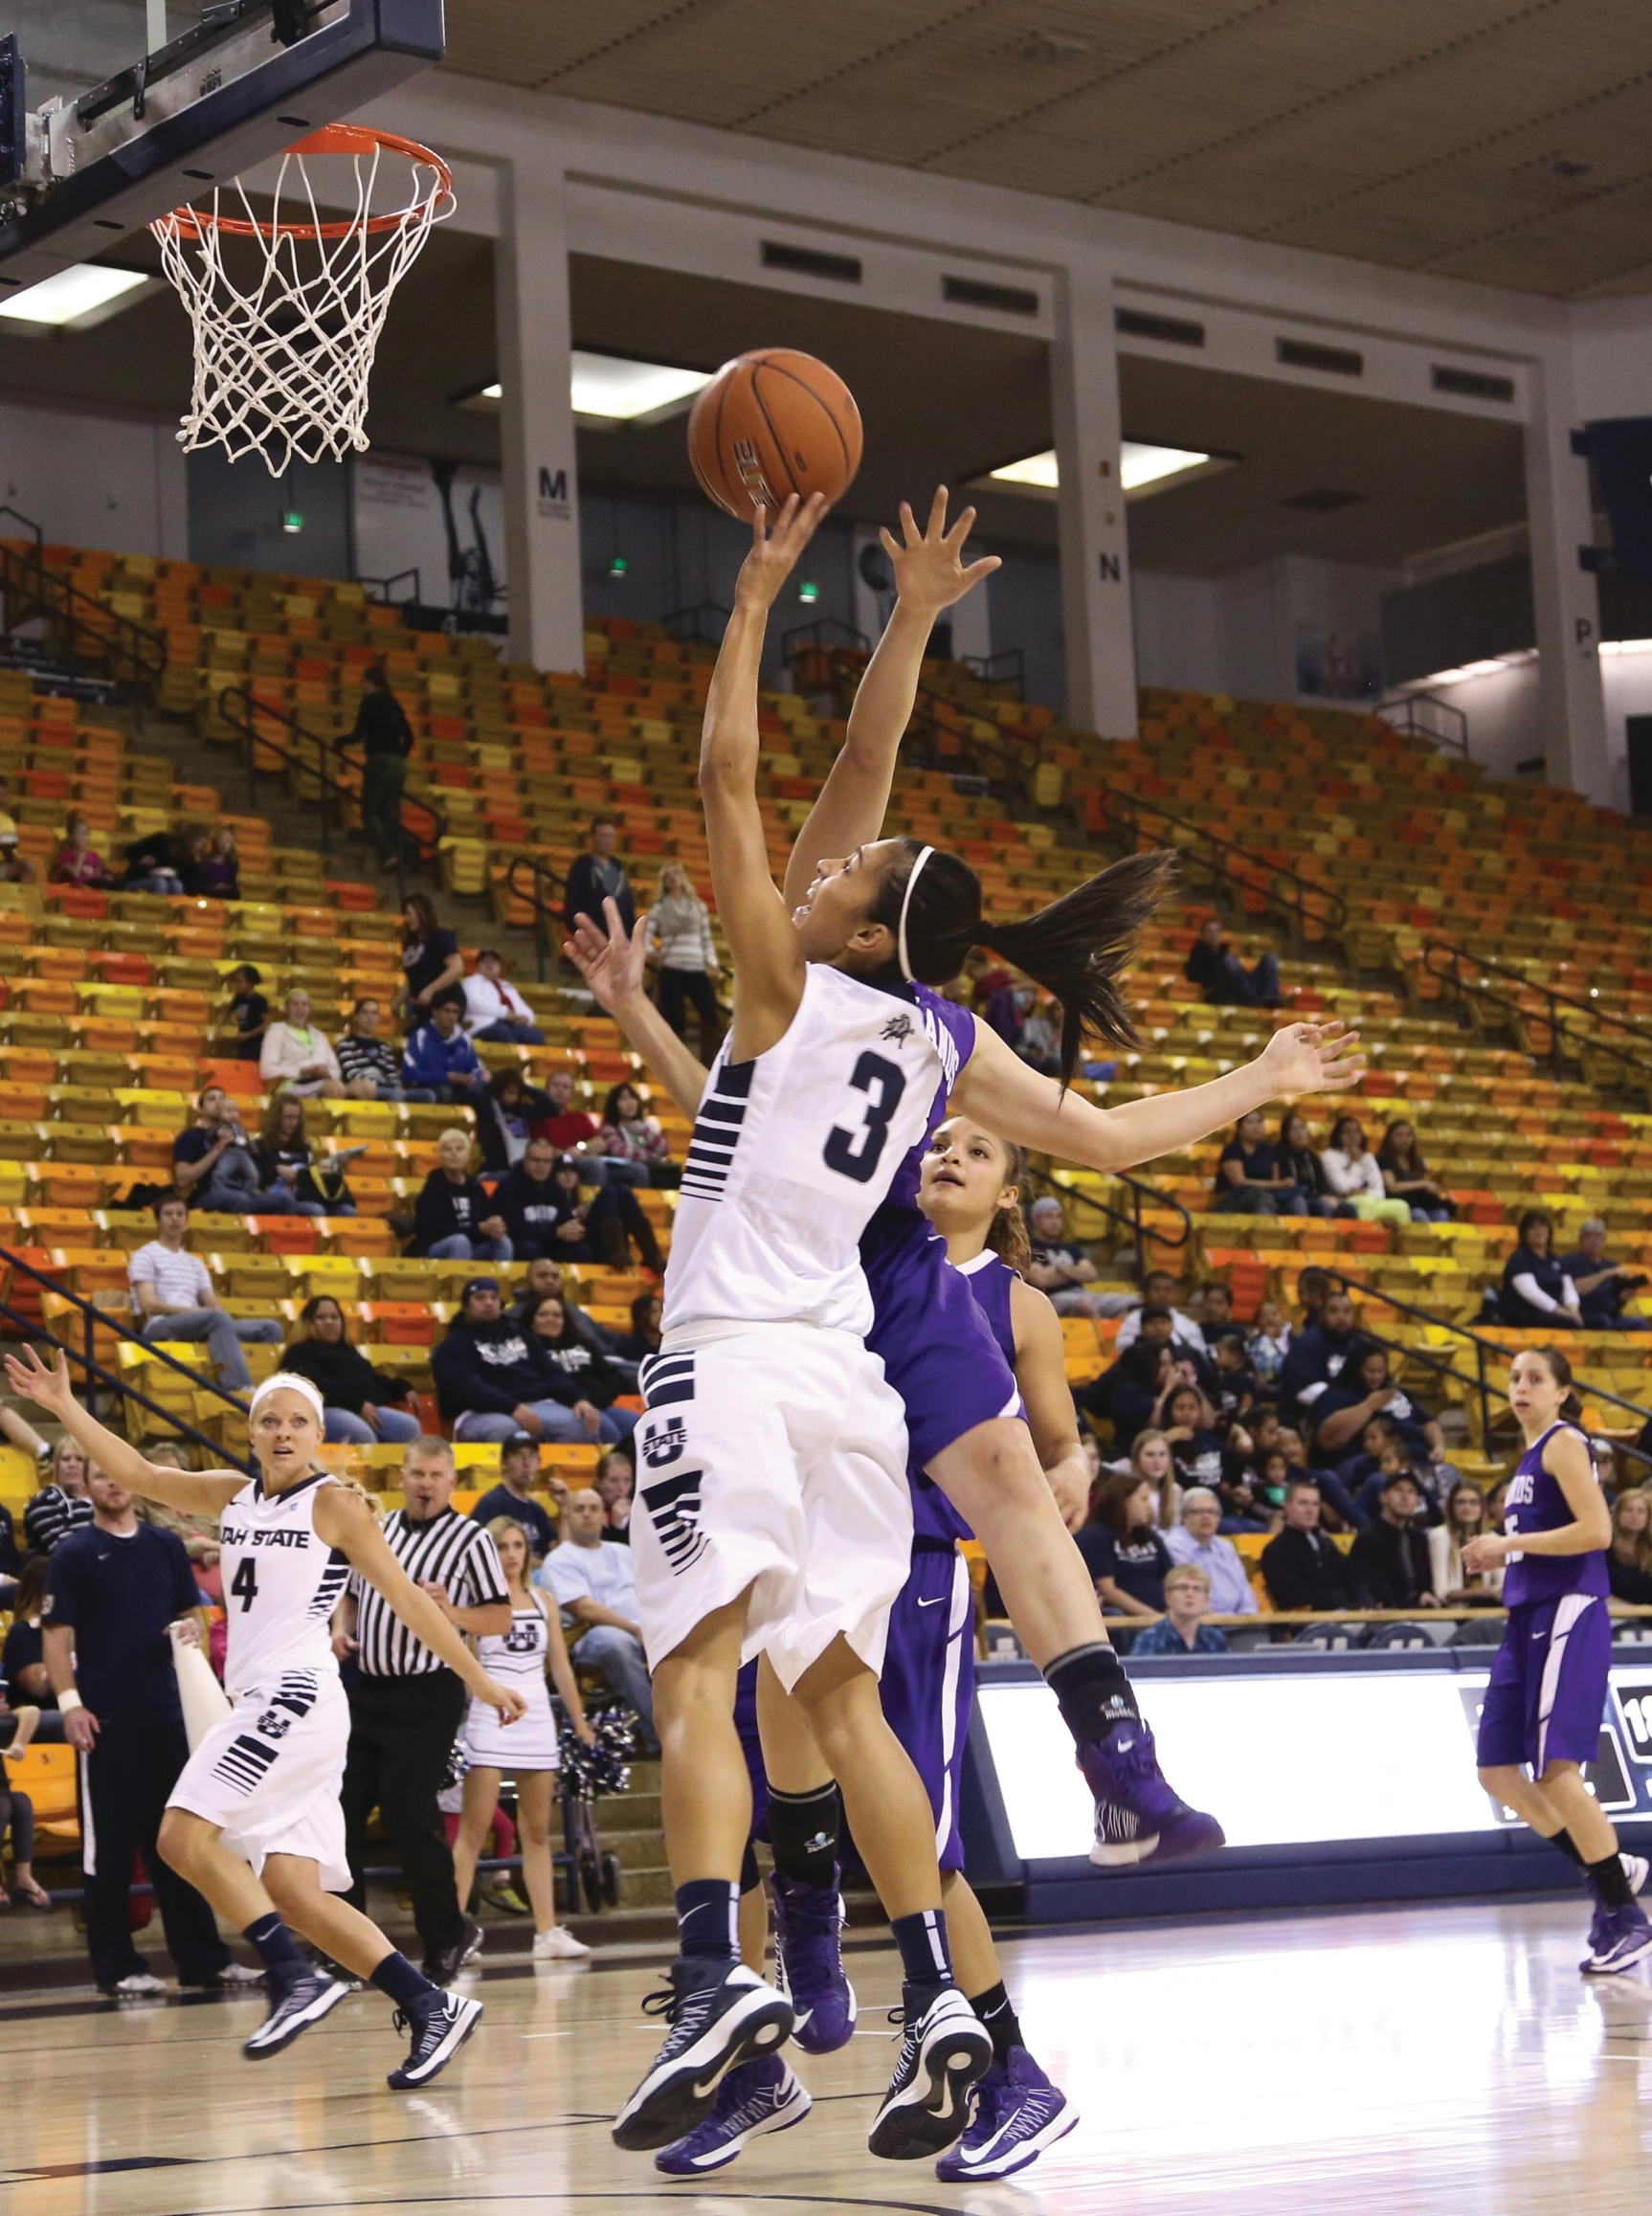 Making the jump Women's basketball looks to make splash in first